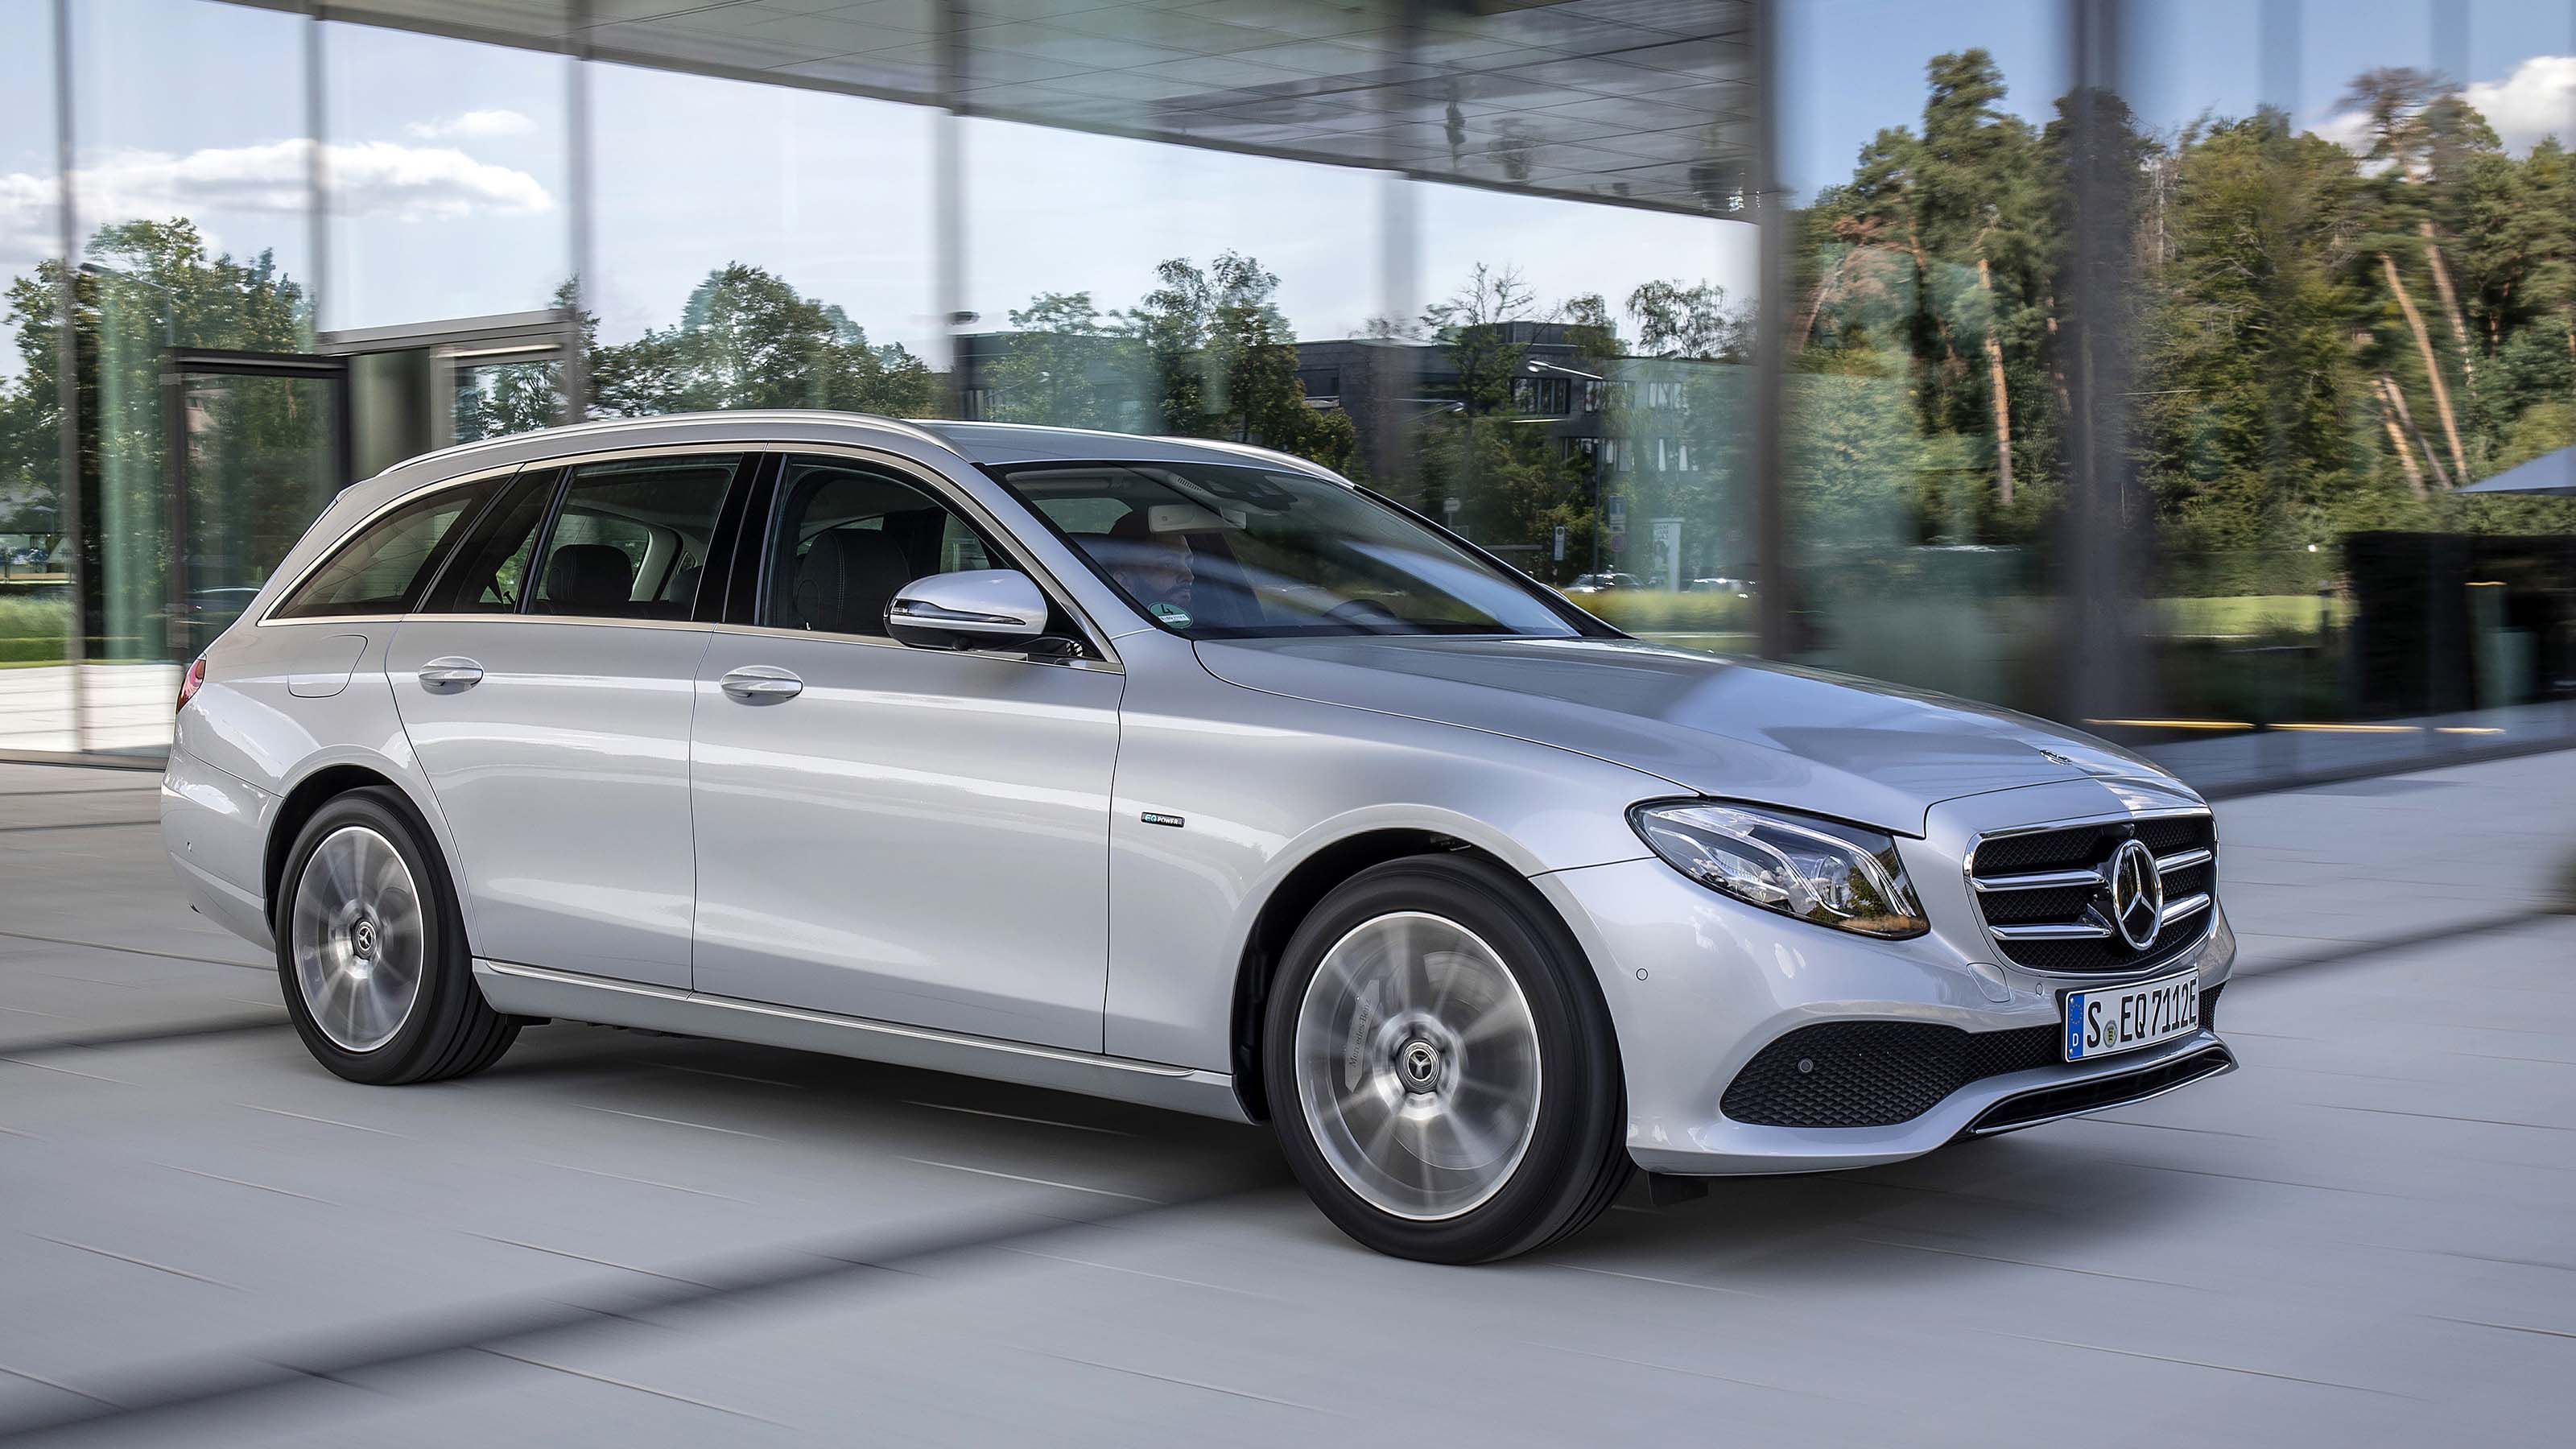 Mercedes E Class Hybrid Review 21 Drivingelectric